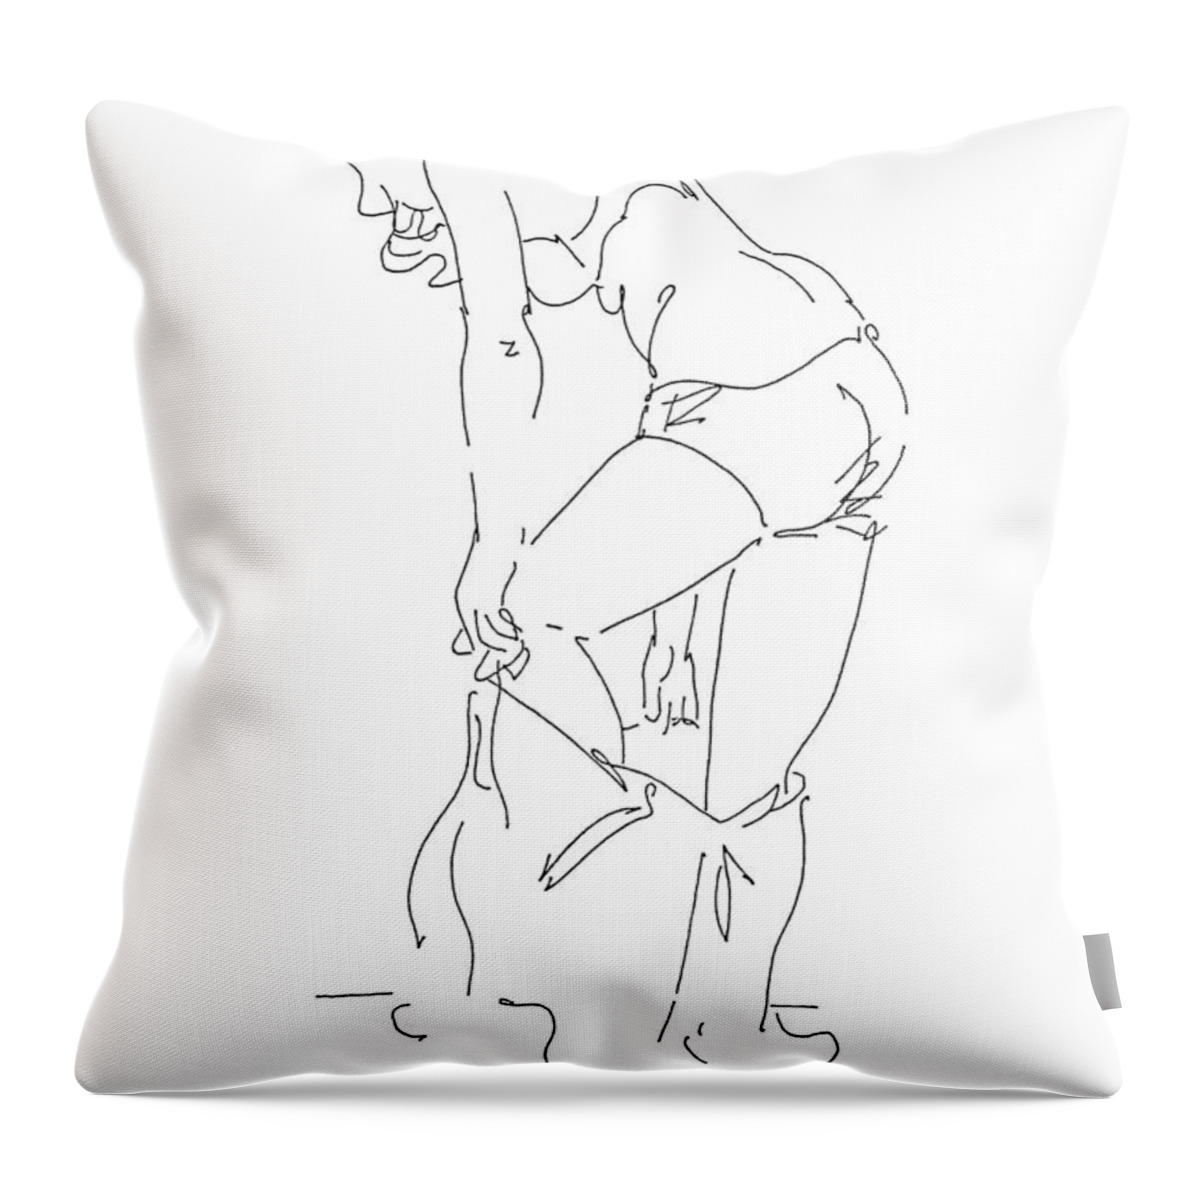 Female Throw Pillow featuring the drawing Nude Female Drawings 1 by Gordon Punt